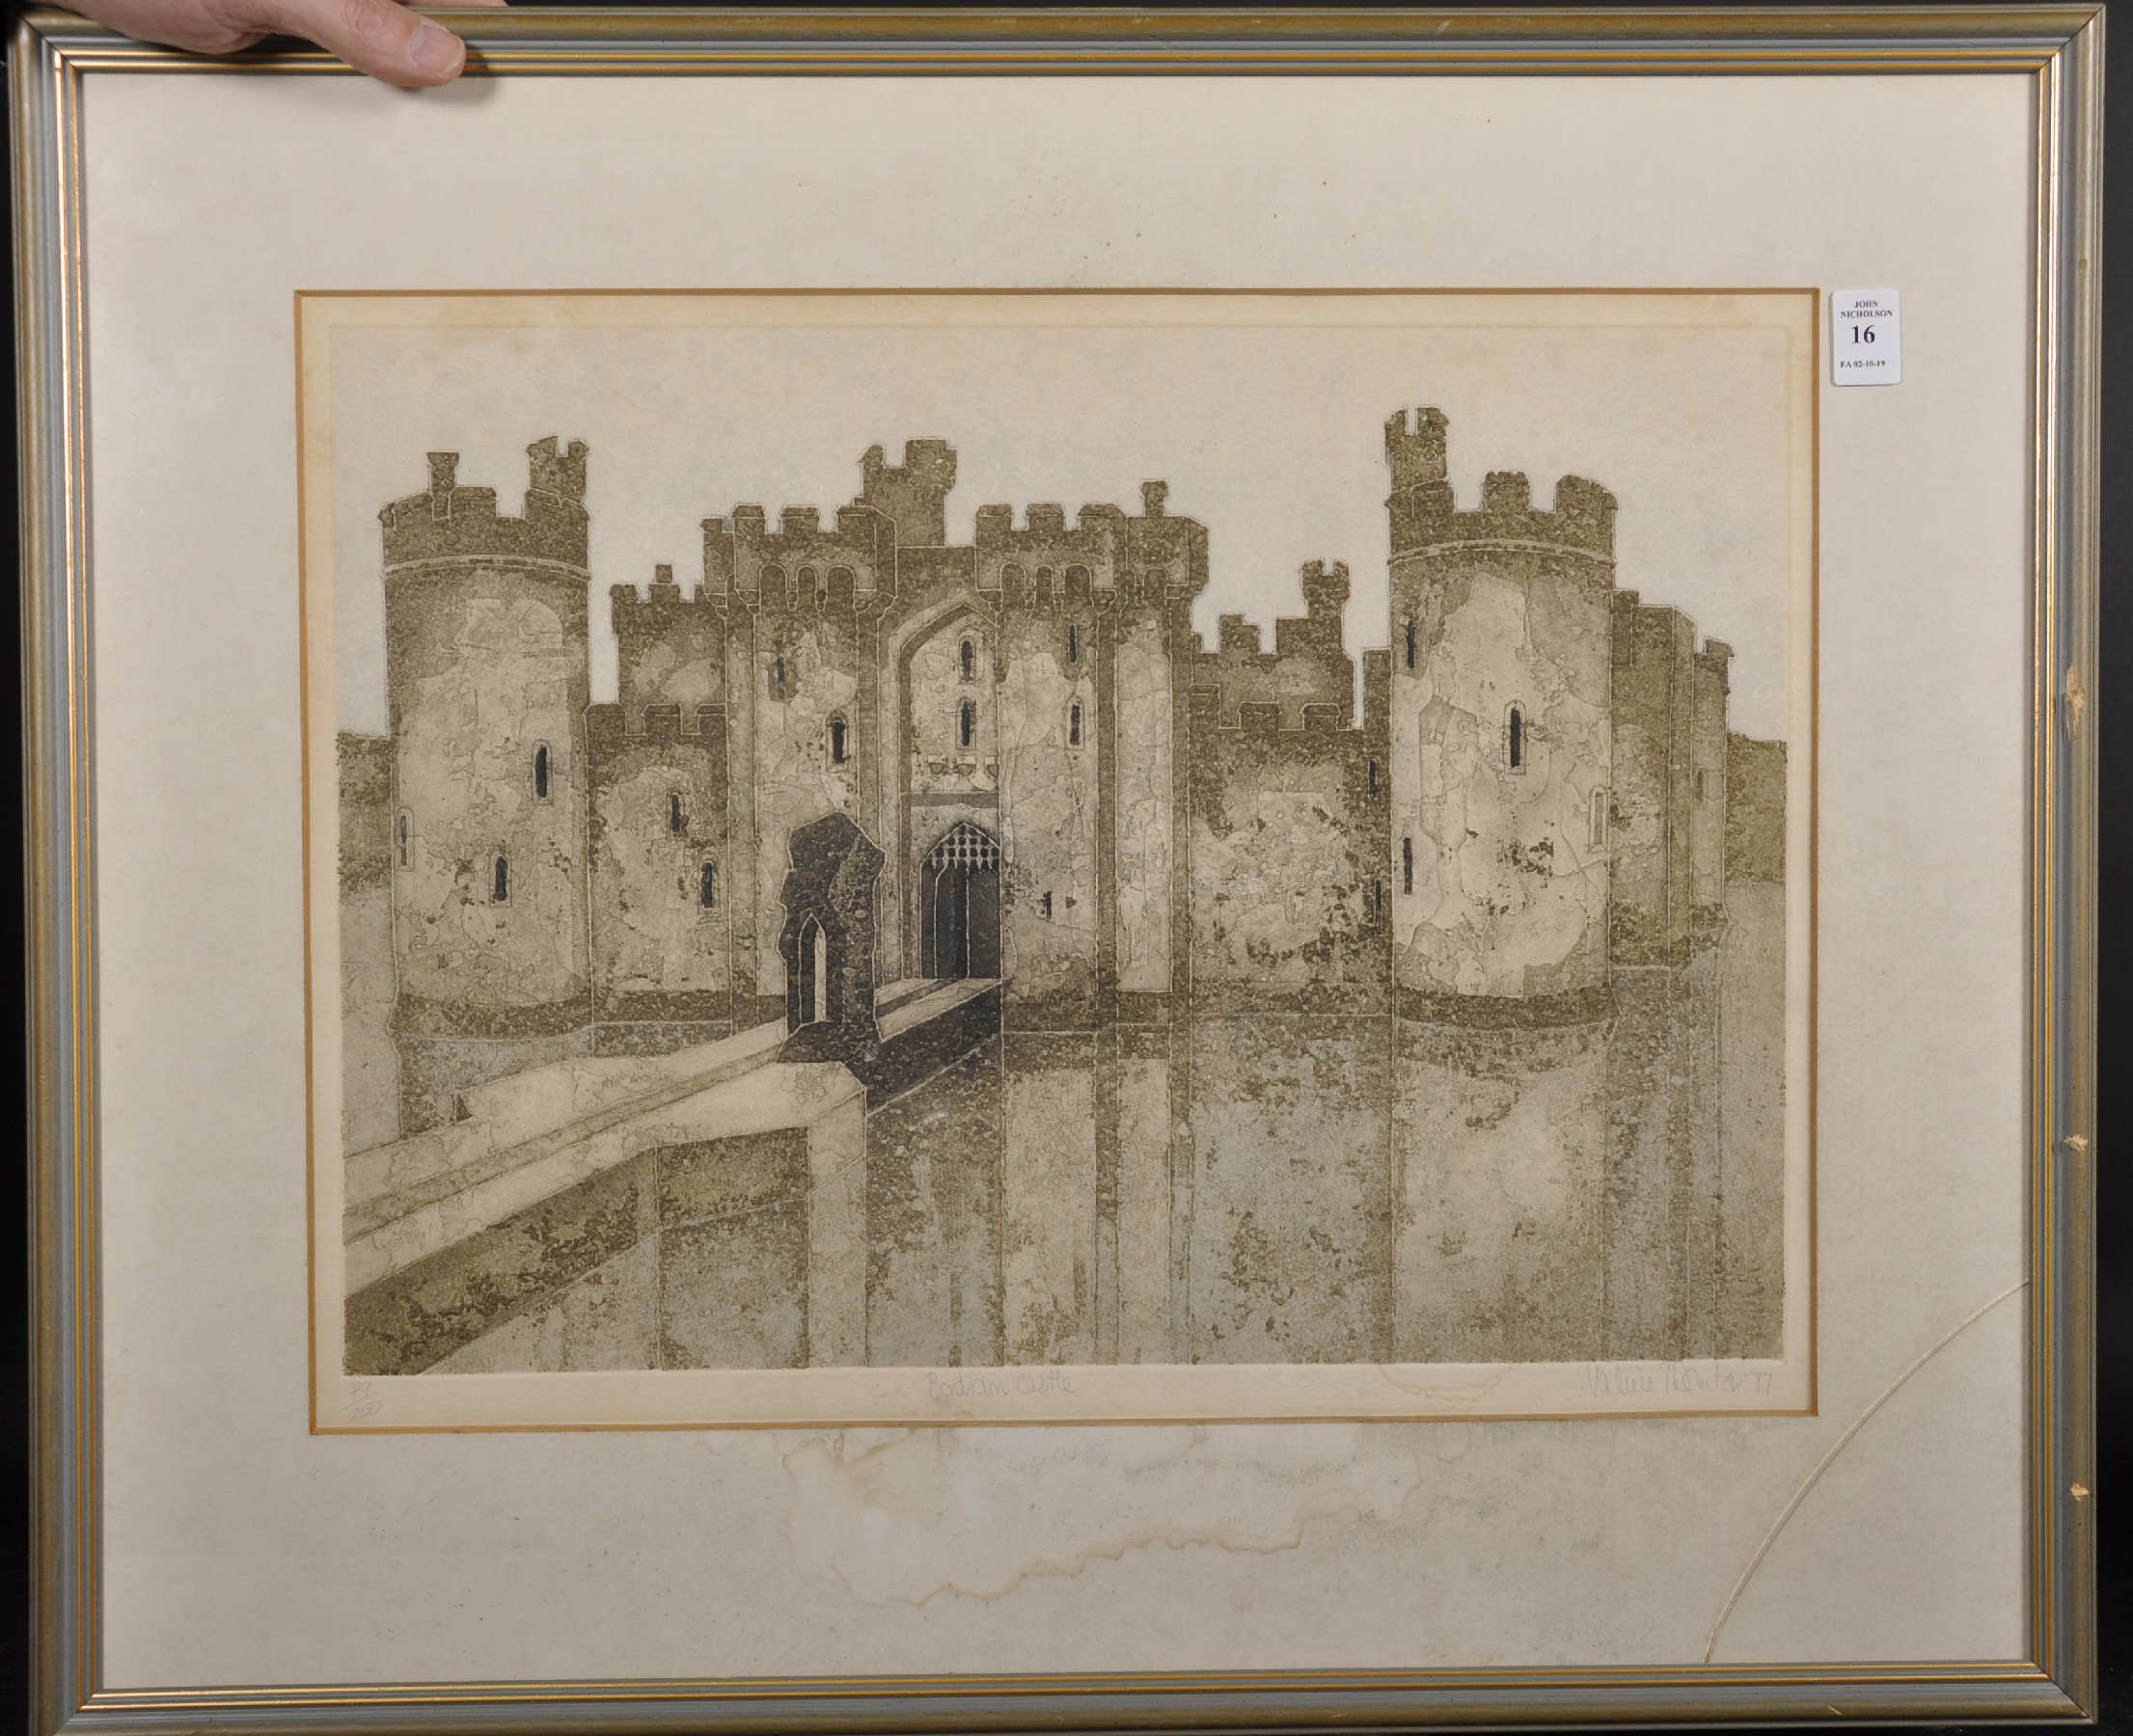 Valerie Thornton (1931-1991) British. "Bodiam Castle", Lithograph, Signed, Inscribed, Dated '77 - Image 2 of 6